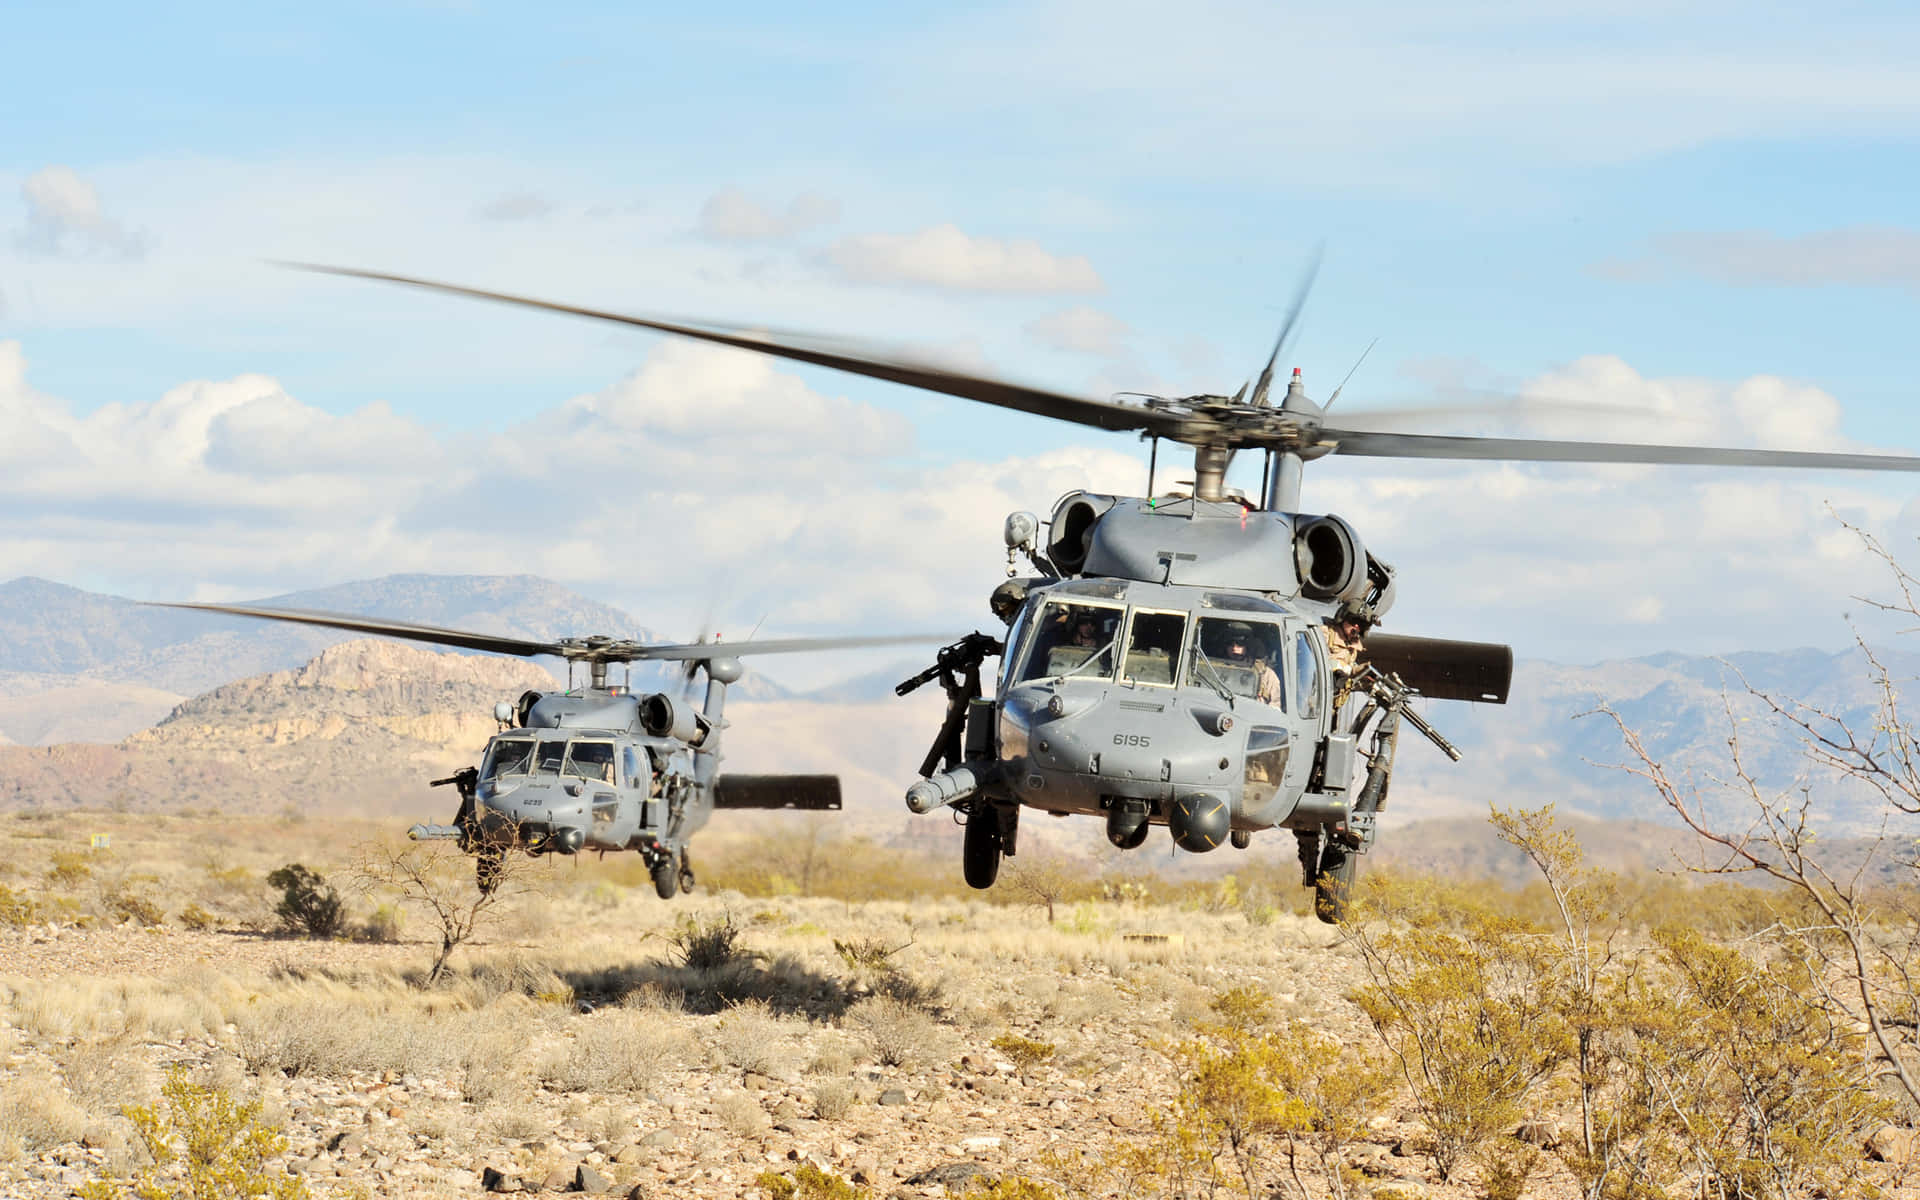 Two Pave Hawk Medium Lift Cool Helicopters Wallpaper